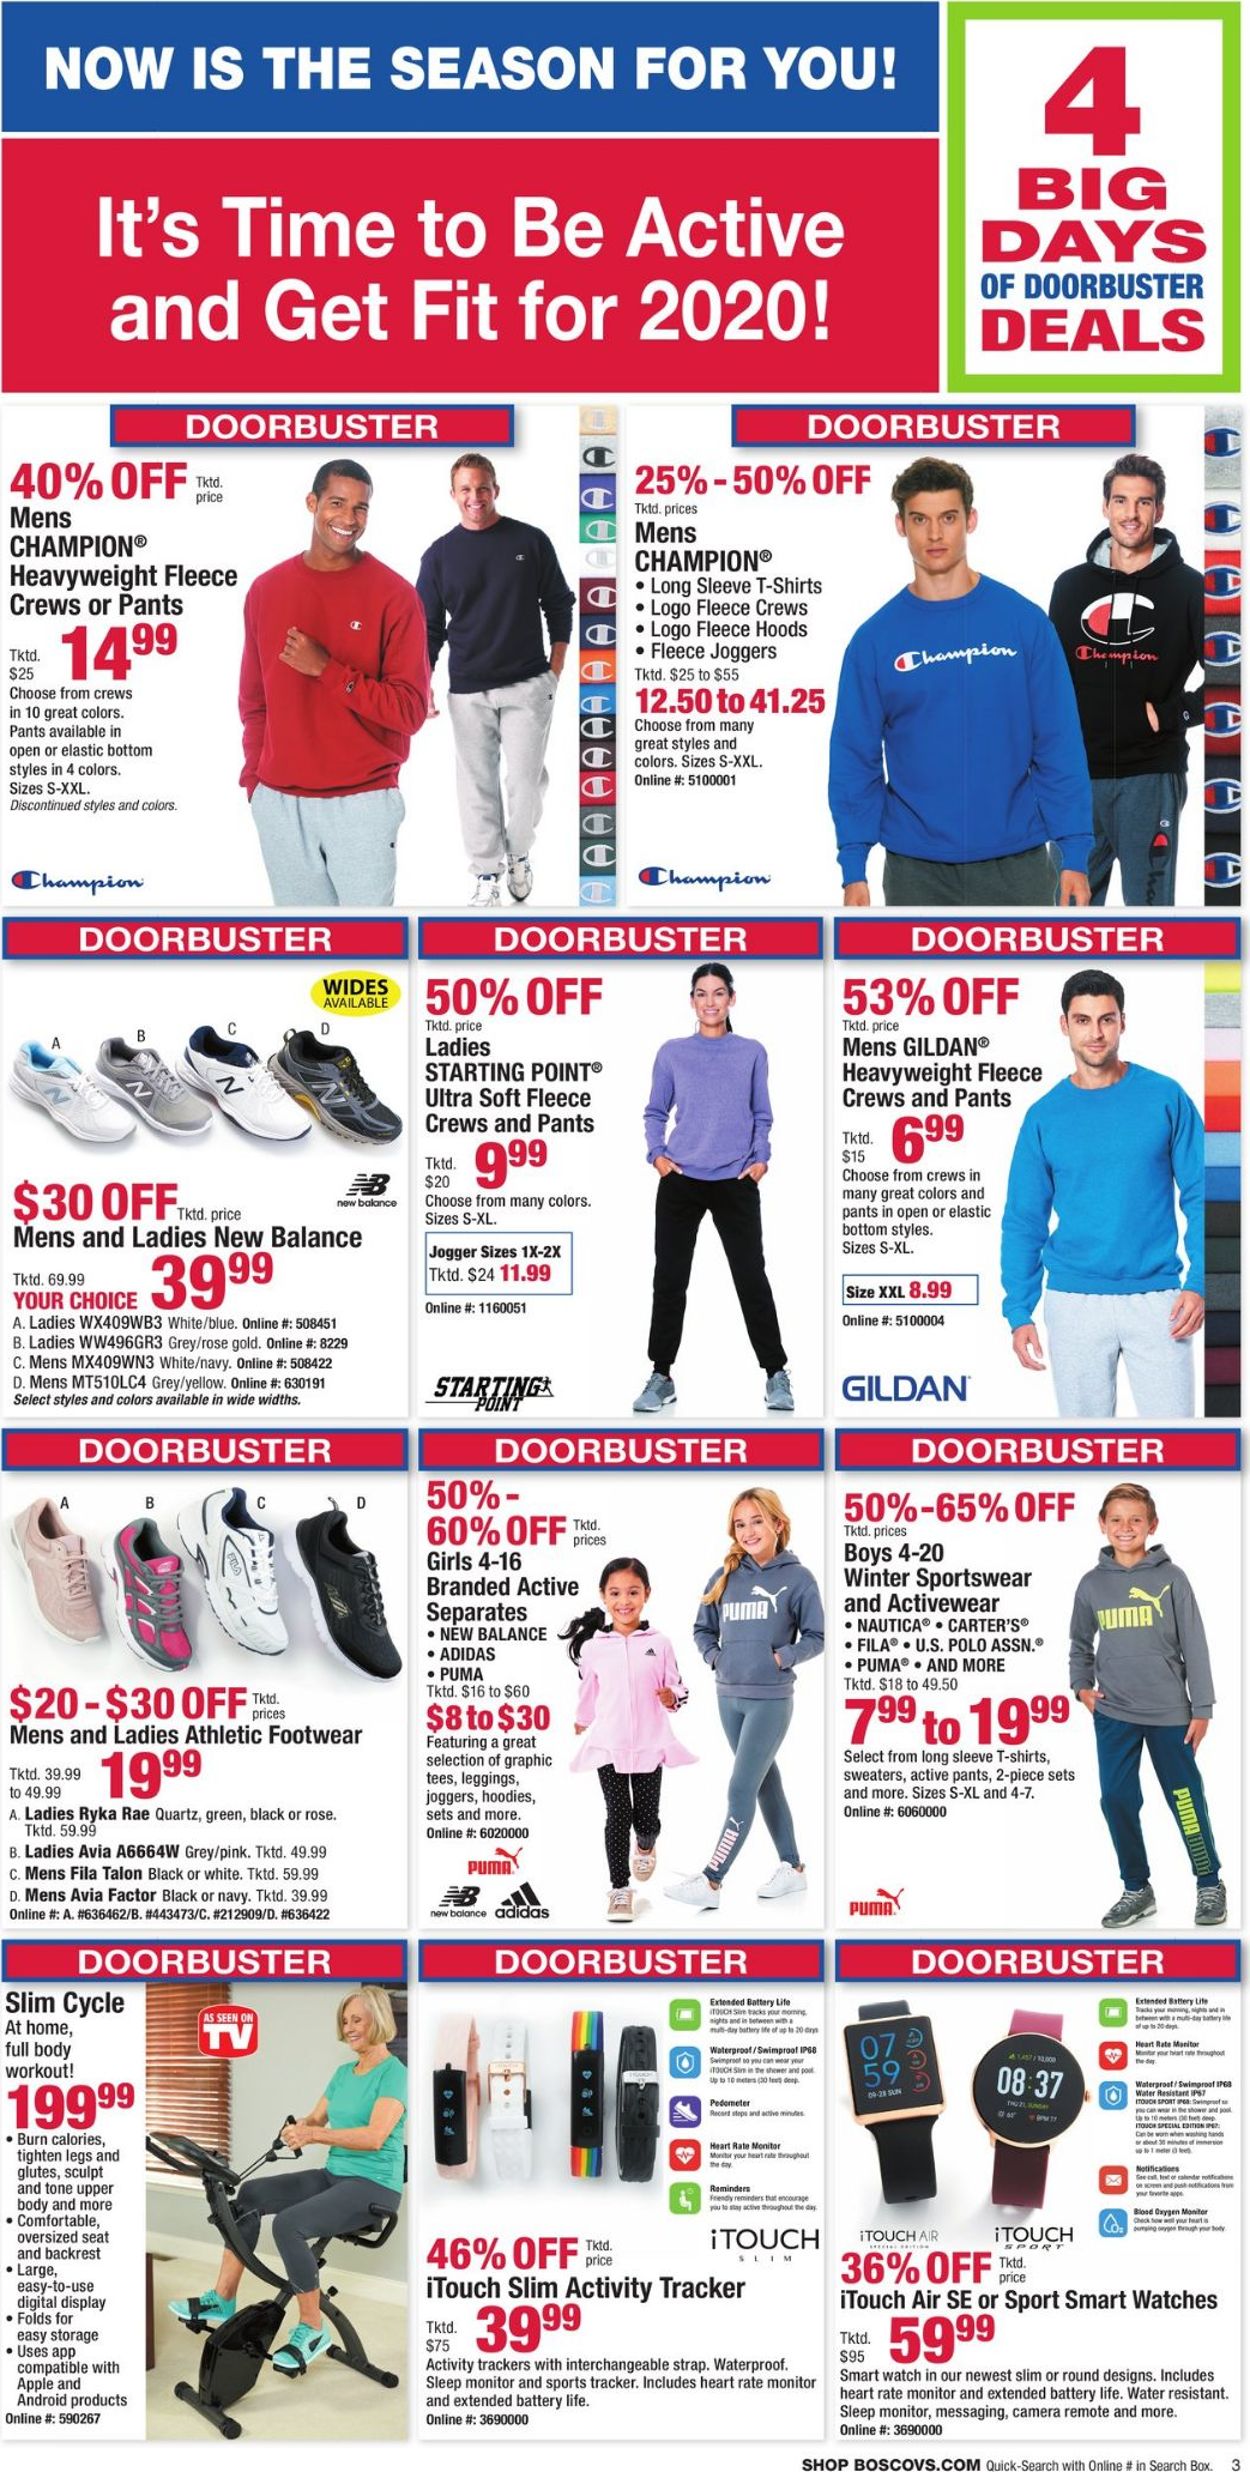 Boscov's - After Christmas Sale 2019 Weekly Ad Circular - valid 12/26-12/29/2019 (Page 3)